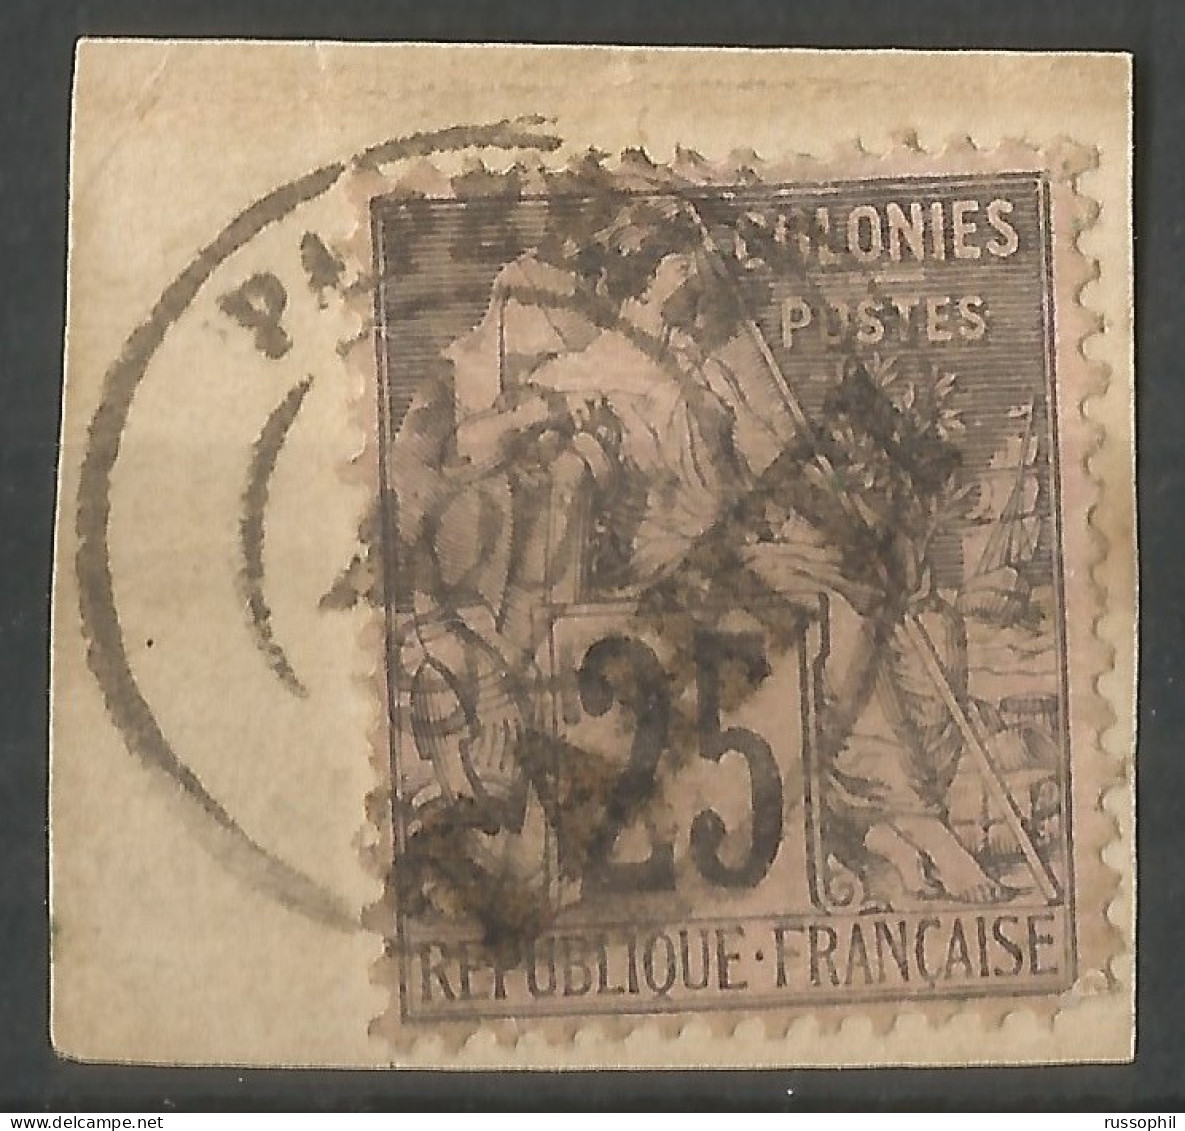 TAHITI - GENERAL COLONIES 25 CENT. OVERCHARGED TAHITI  (Yv. #15) ON FRAGMENT - 1894 - Used Stamps